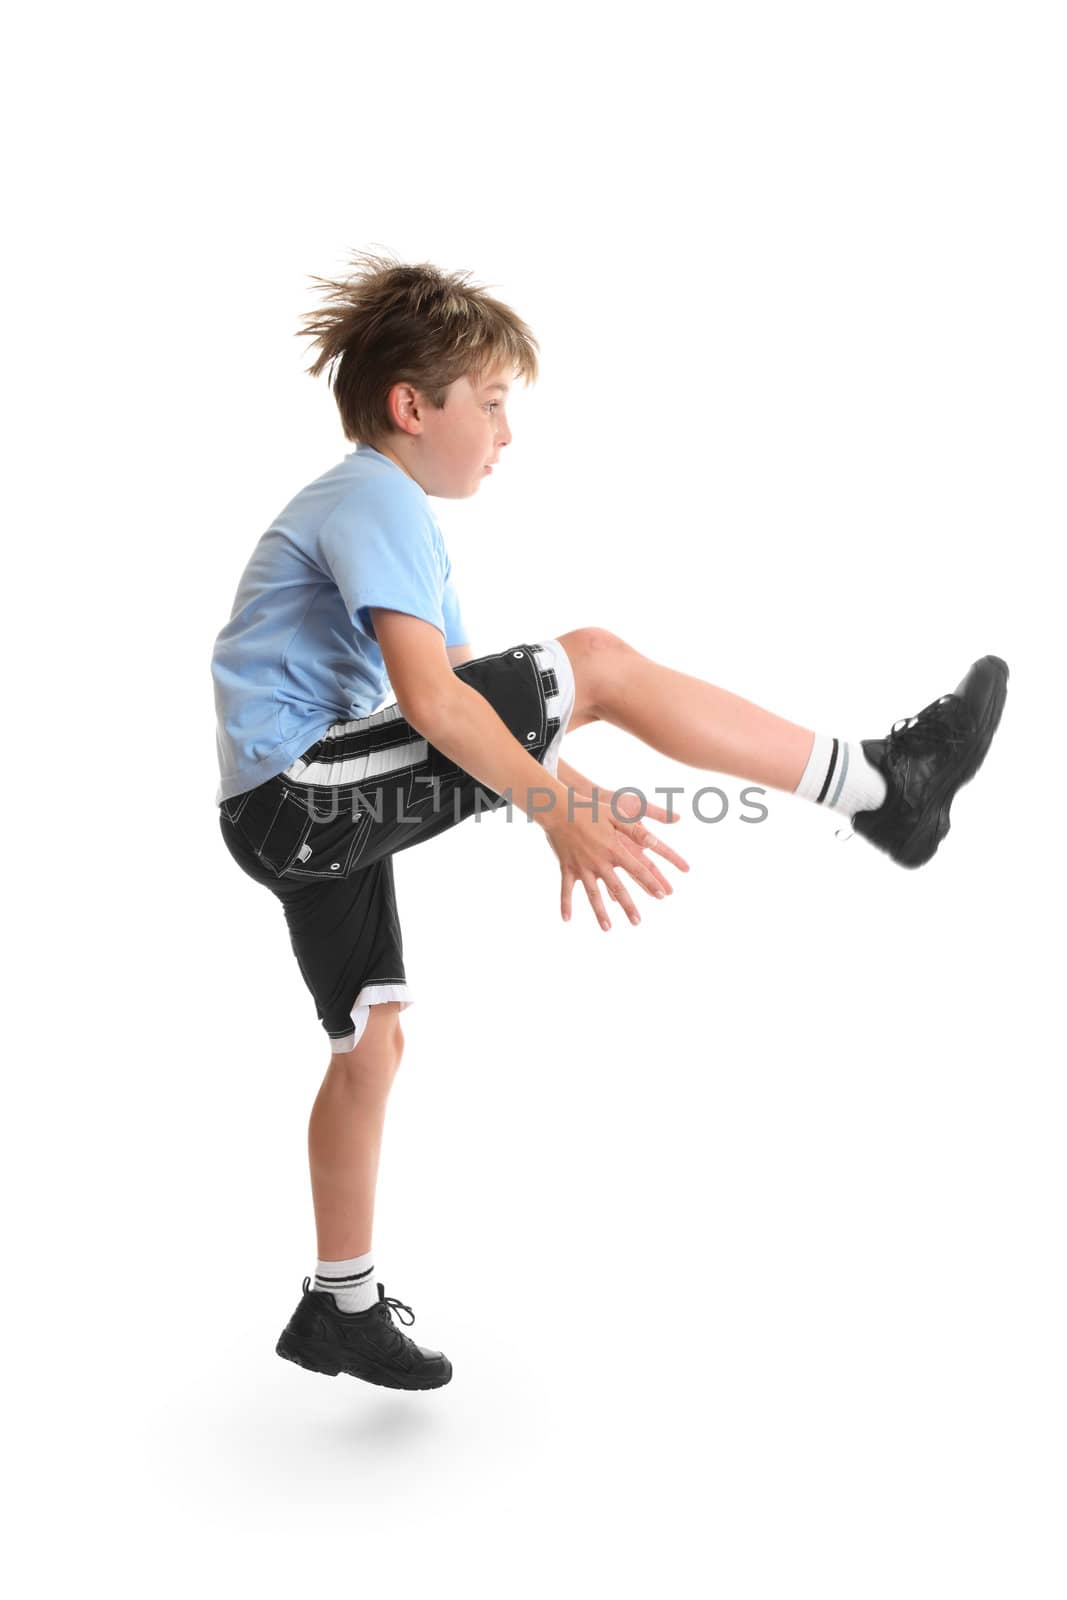 Healthy young child doing fitness exercises.